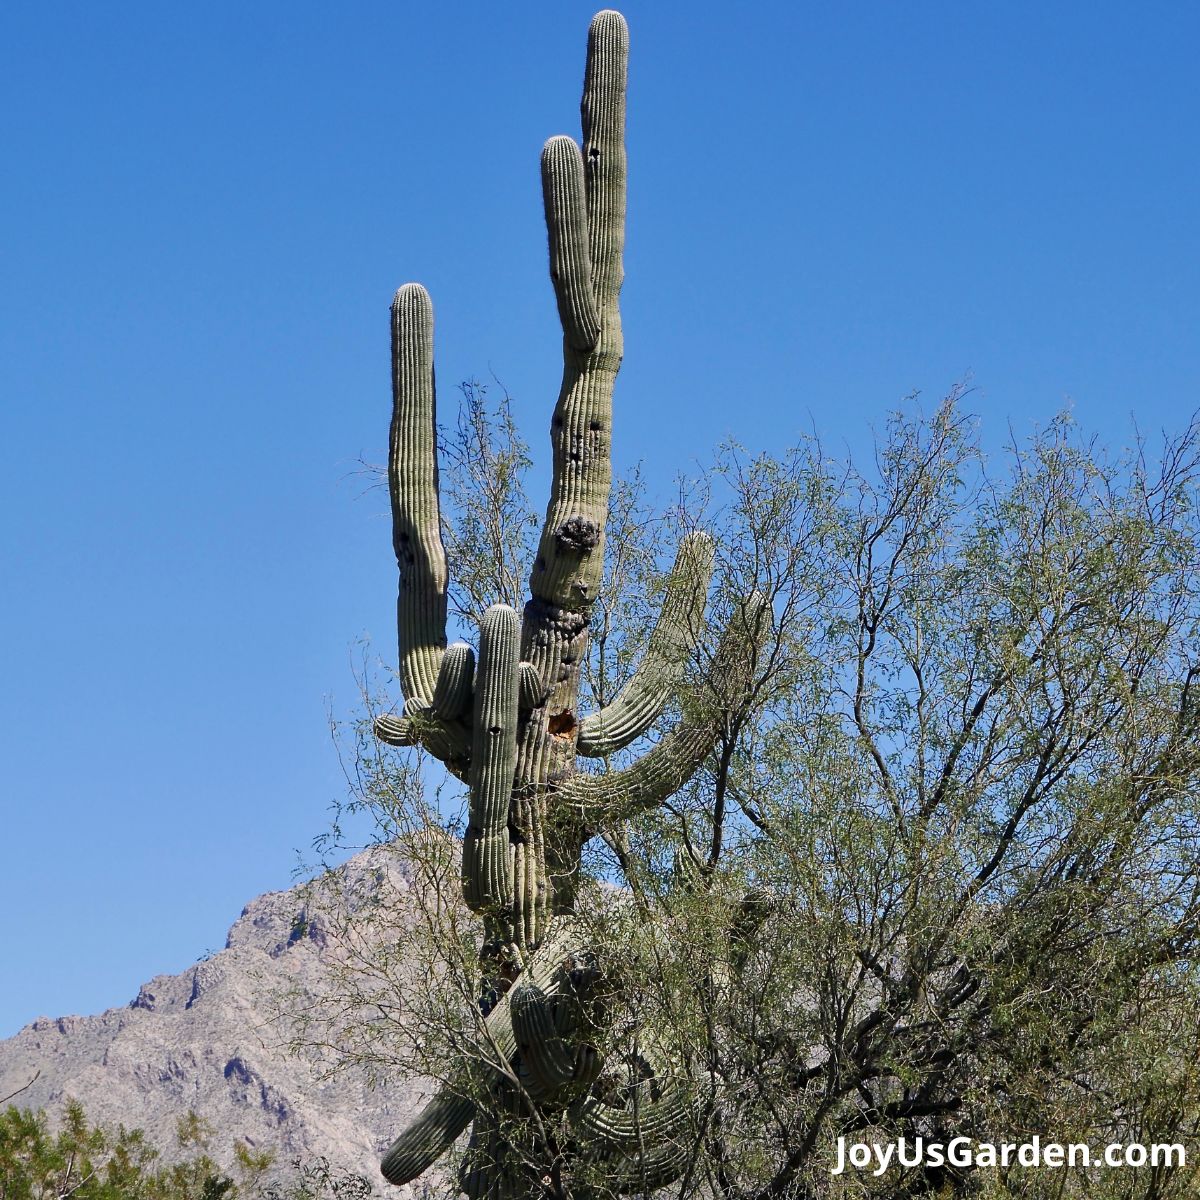 a tall saguaro cactus with many arms grows with mountains in the background in tucson arizona